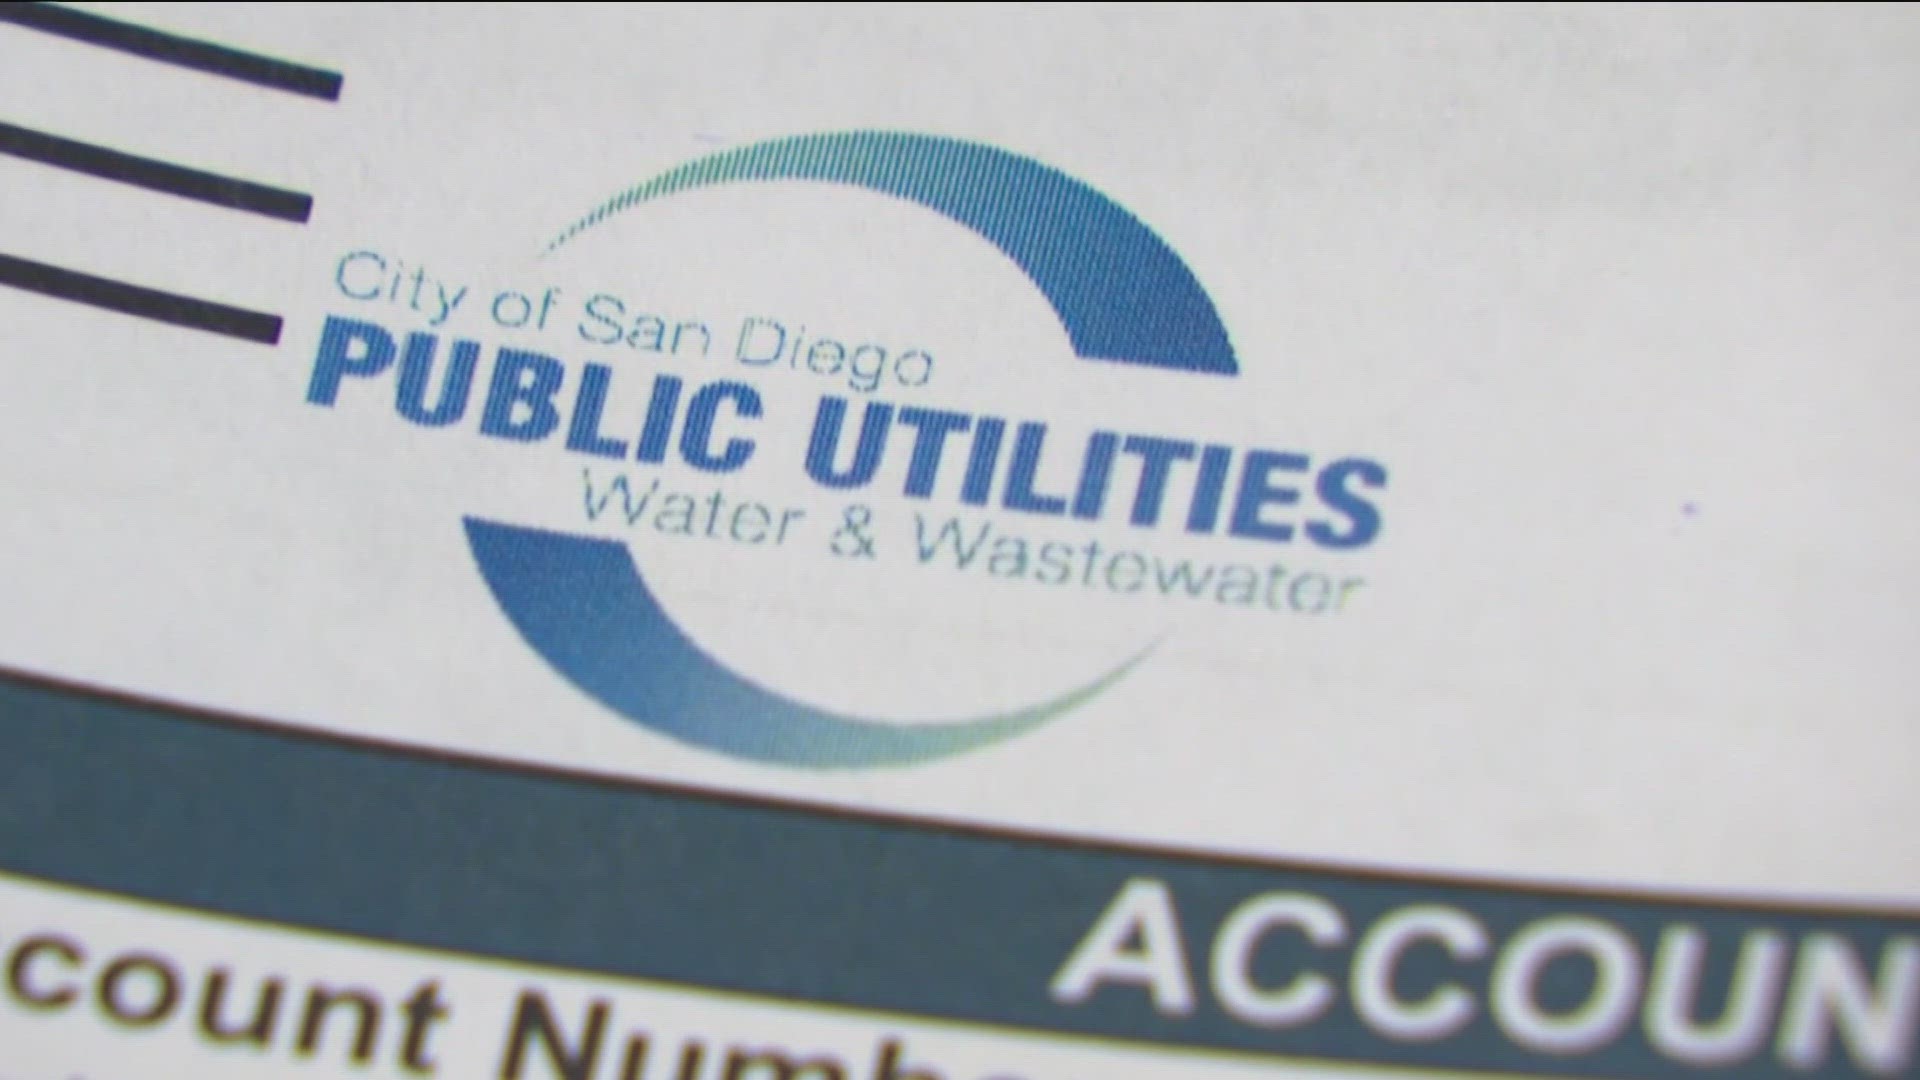 Since the 2018 city audit, the San Diego City Auditor has prodded the Public Utilities Department and elected officials to notify customers when their bill is held.